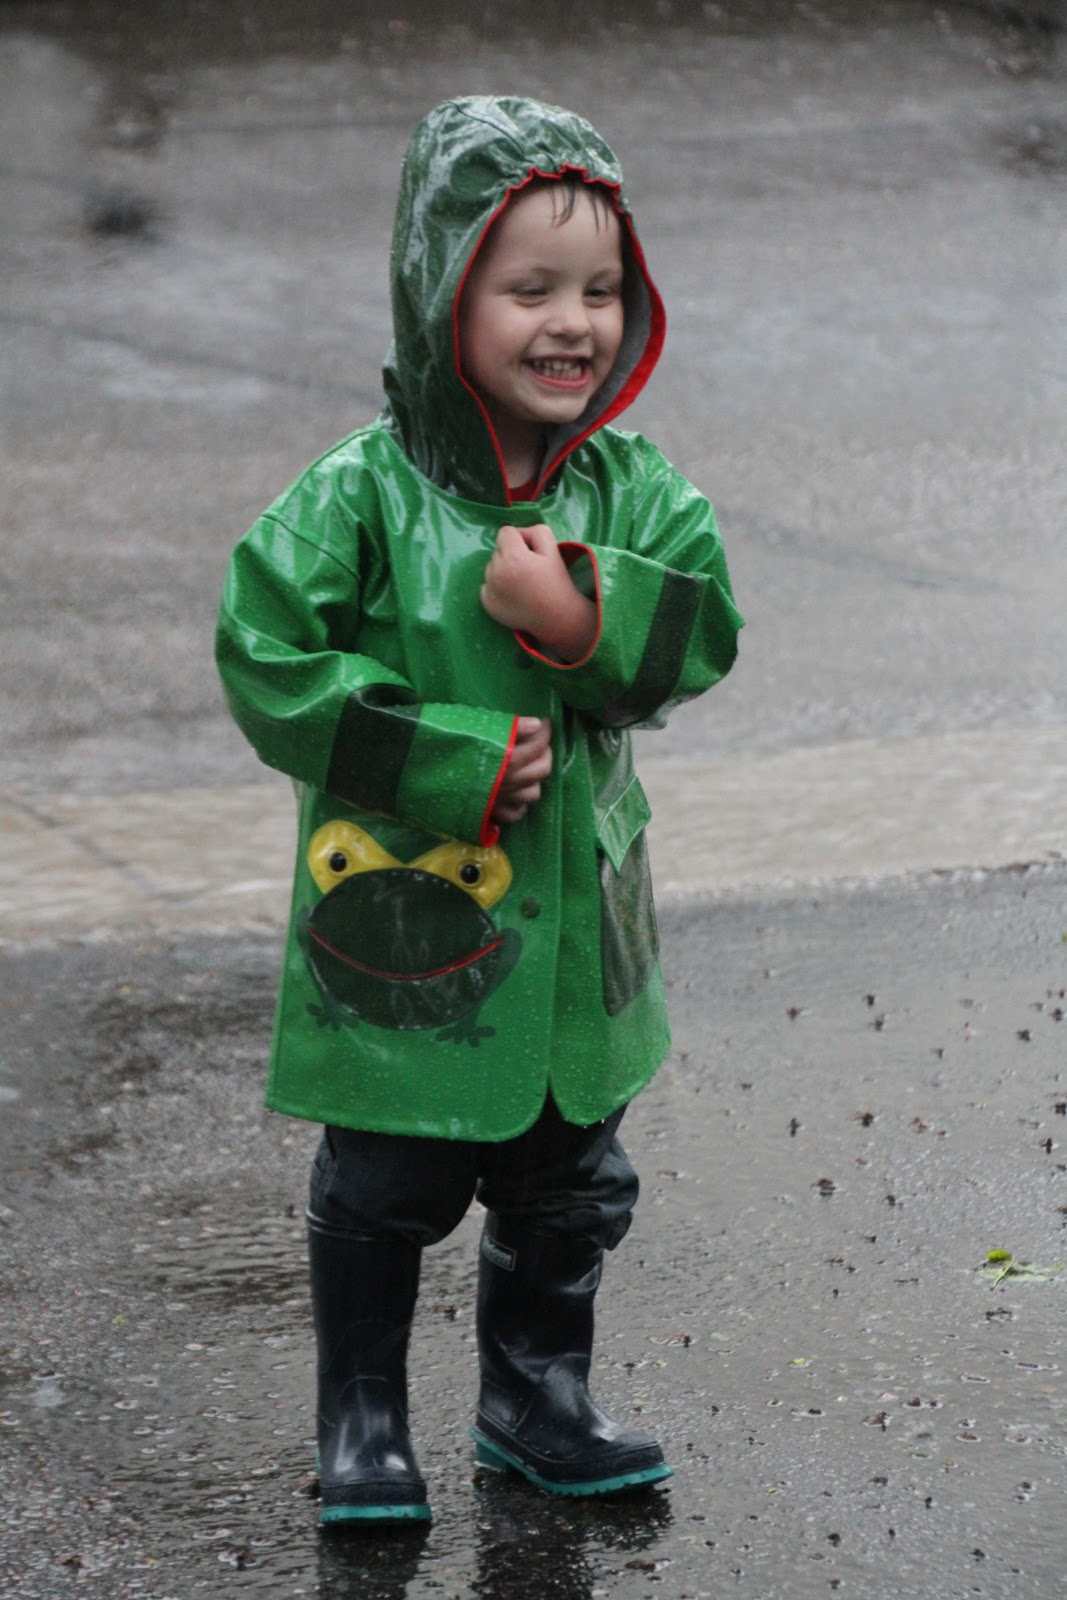 Everyday Moments: Little boys, rubber boots, and rain puddles = a ...